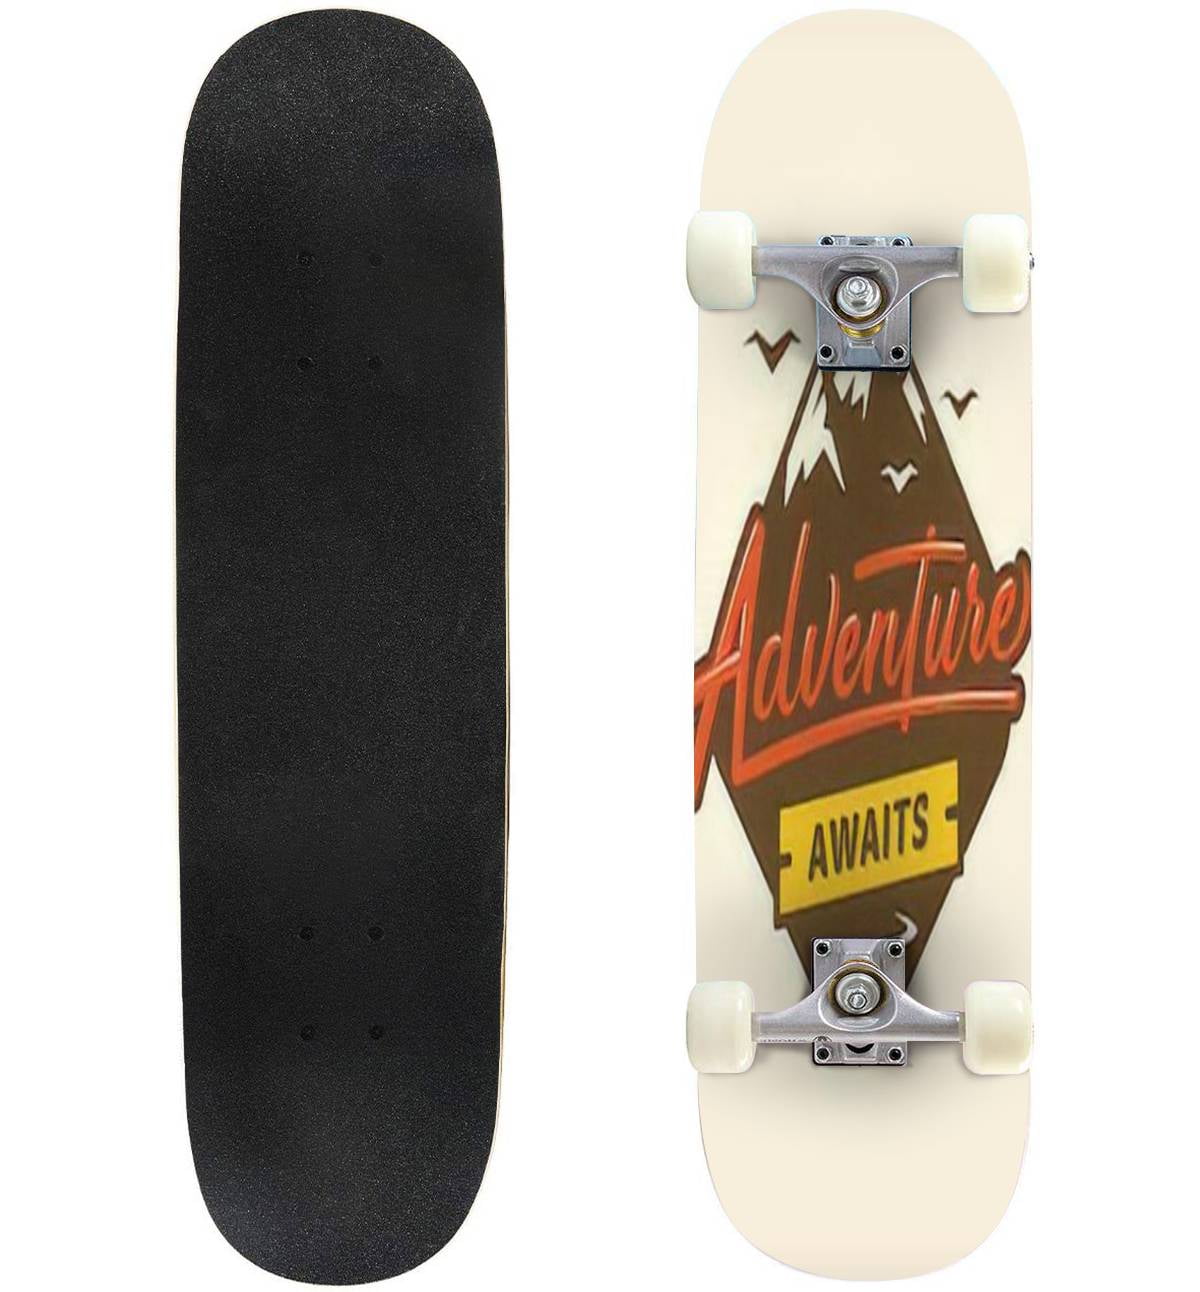 Adventure awaits Lettering inspiring typography with Outdoor Skateboard Longboards Pro Complete Skate Board Cruiser - Walmart.com